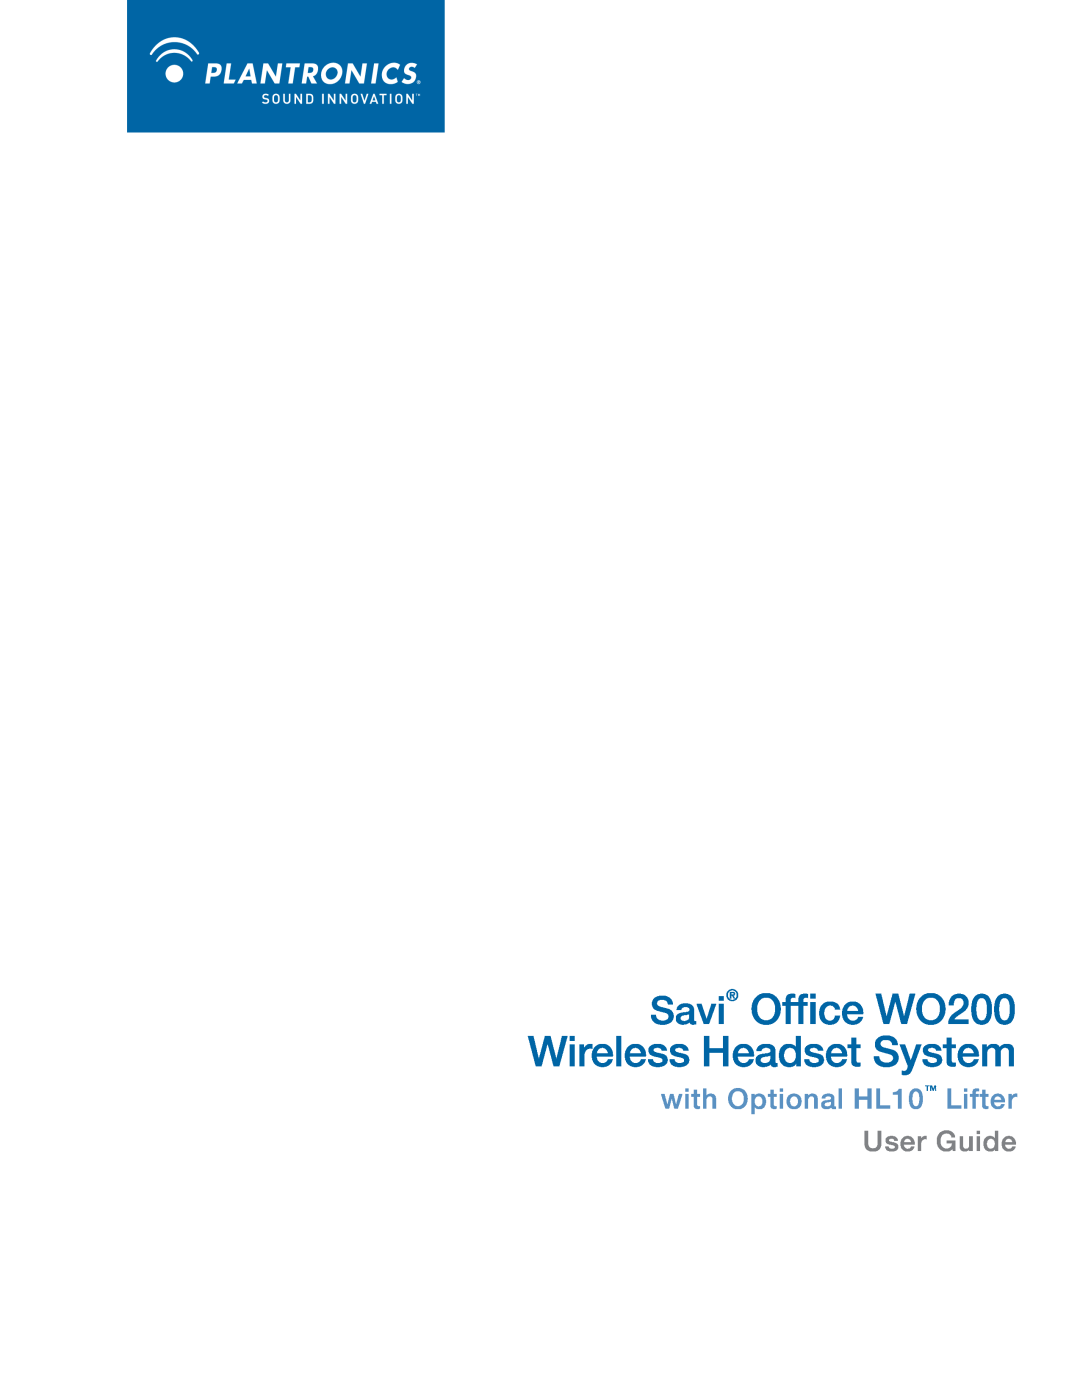 Plantronics manual Savi Office WO200 Wireless Headset System, with Optional HL10 Lifter User Guide 